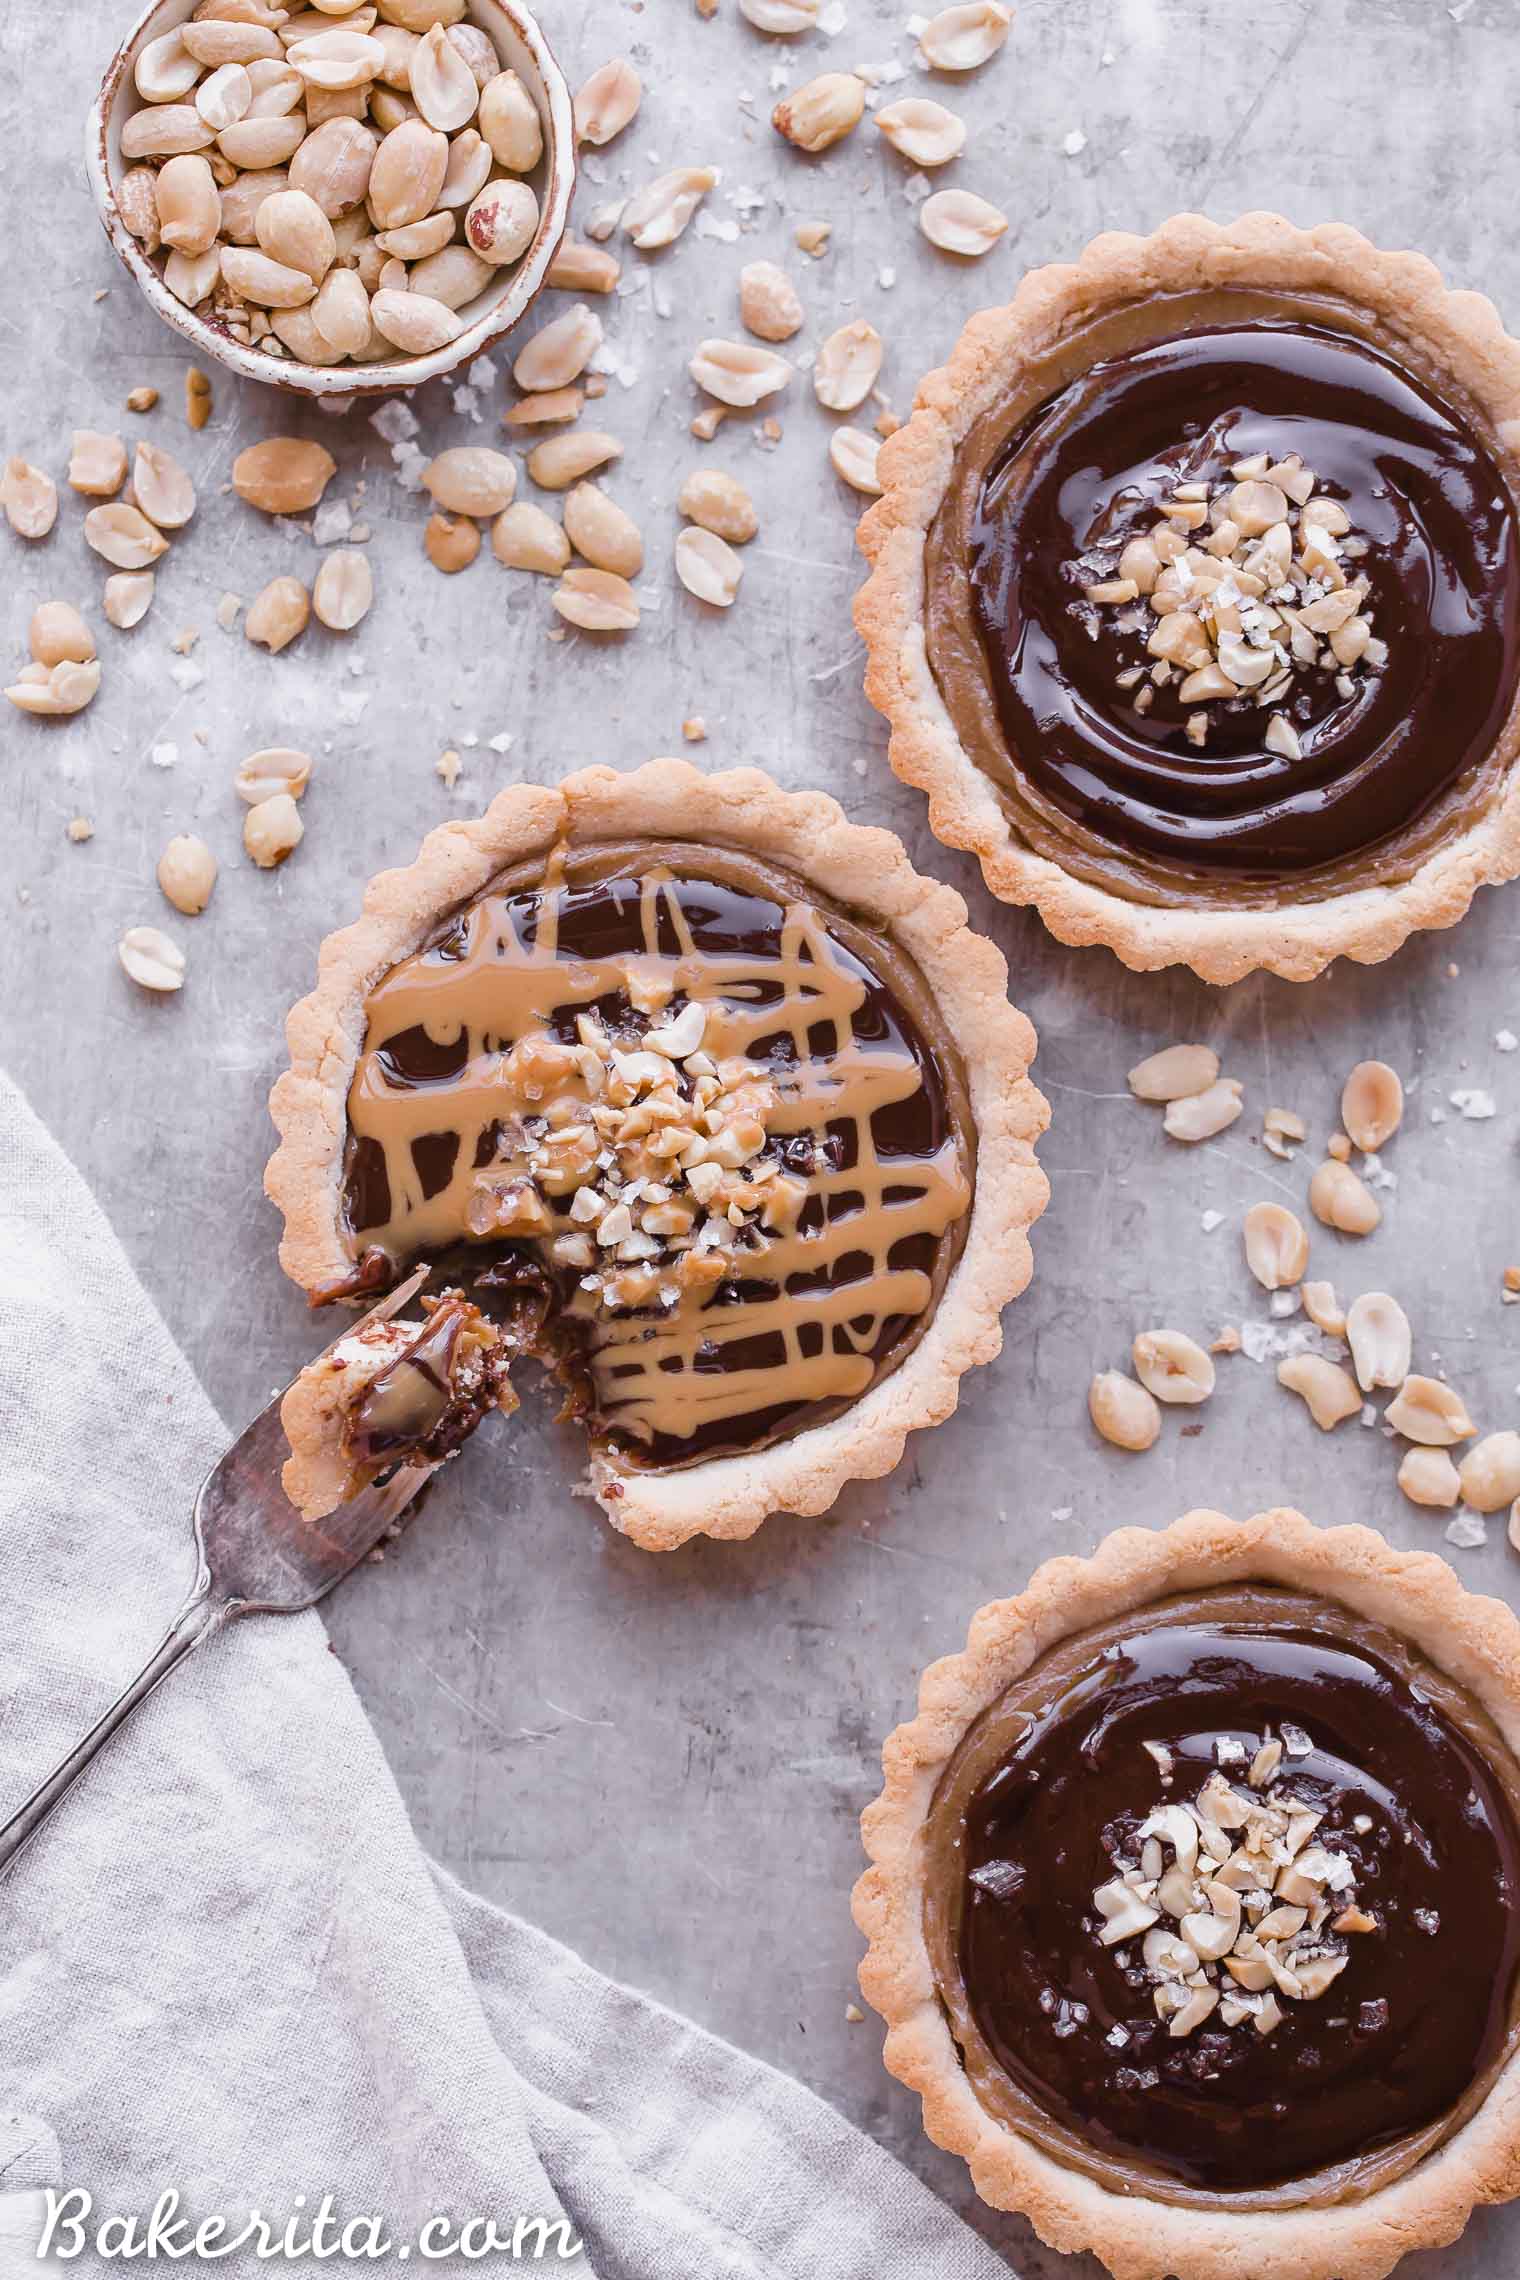 These Chocolate Peanut Butter Caramel Tarts have a crunchy shortbread crust that's filled with a creamy peanut butter date caramel and topped with creamy chocolate ganache! This decadent tart recipe is gluten-free, grain-free and vegan.